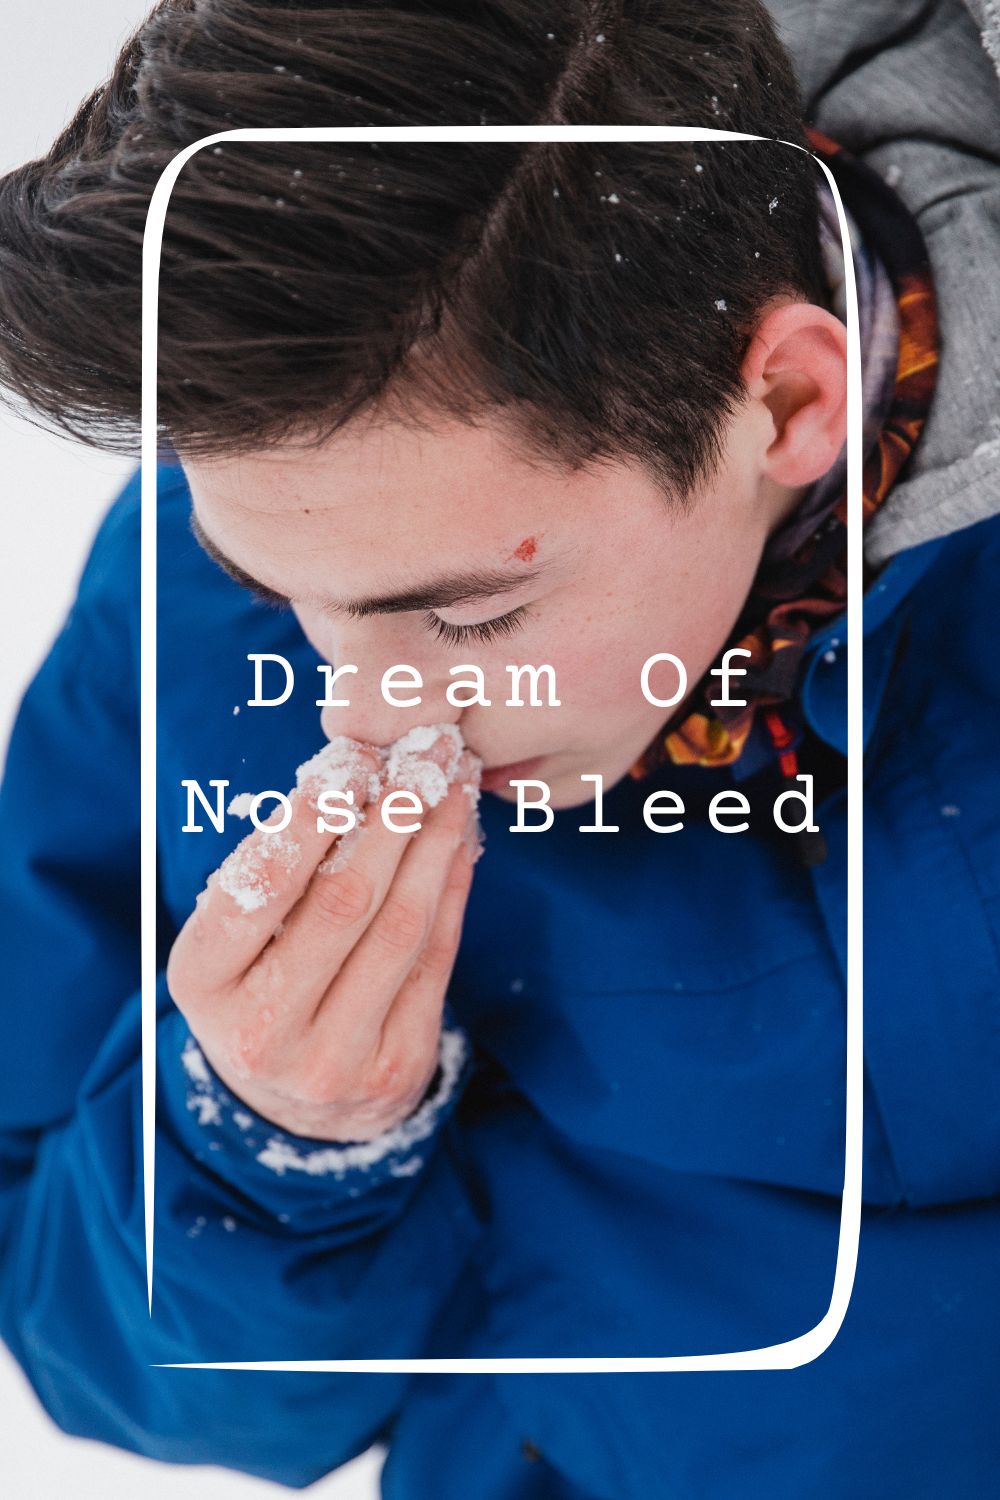 Dream Of Nose Bleed Meanings 2